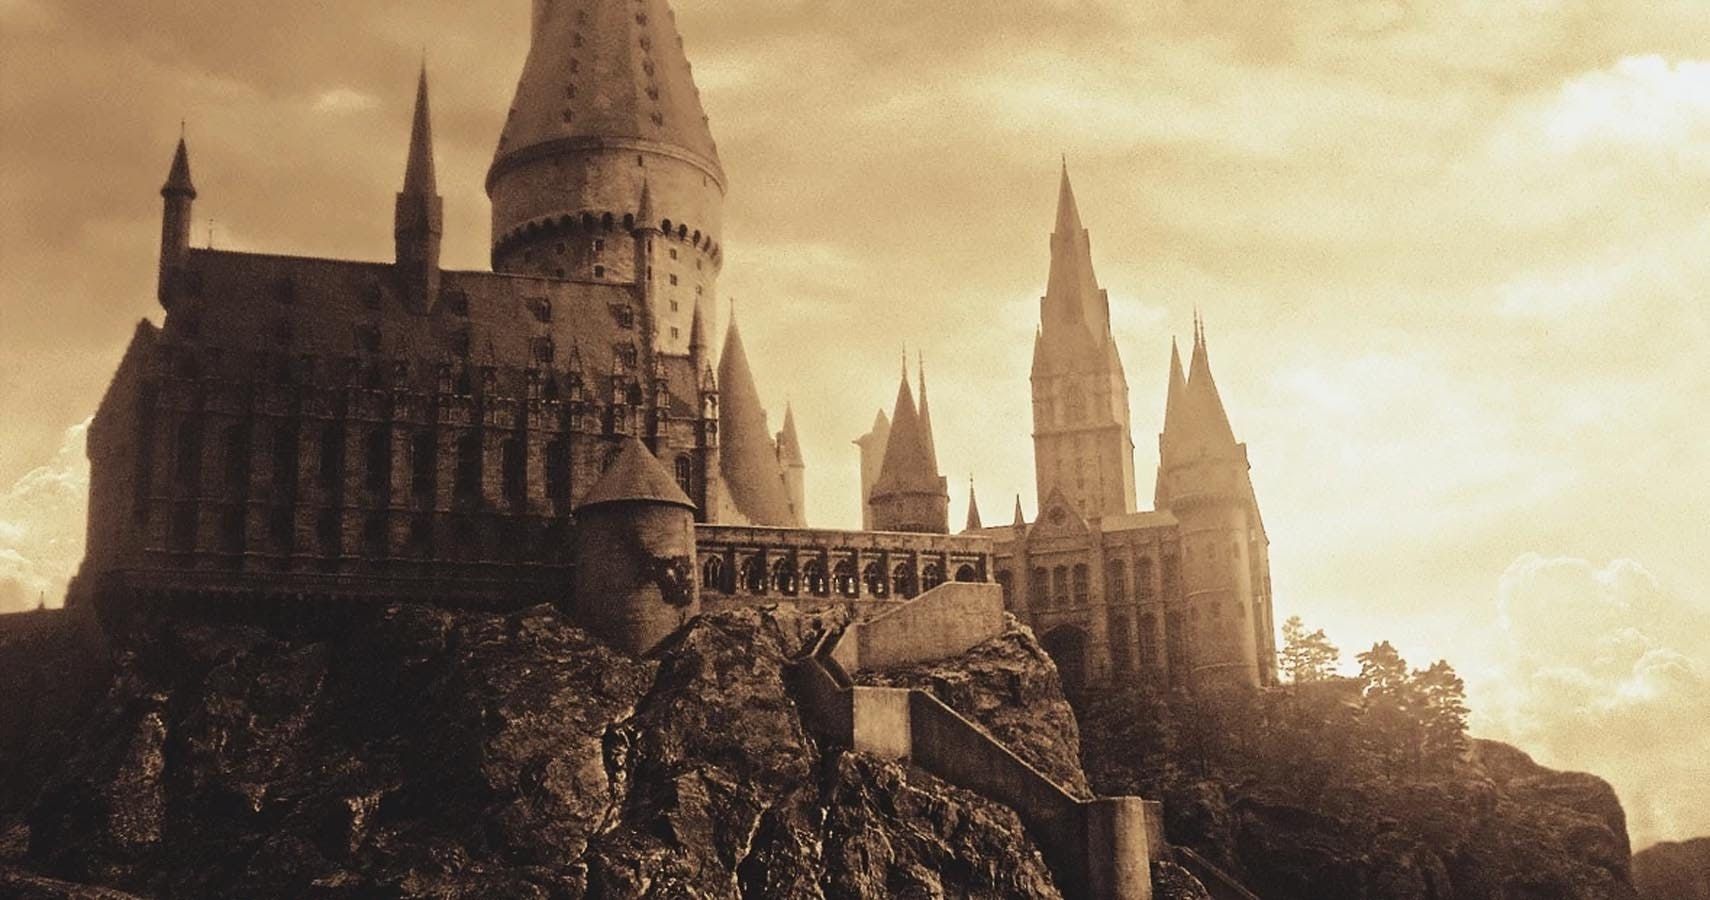 Harry Potter 12 Facts About The Hogwarts Castle The Movies Leave Out